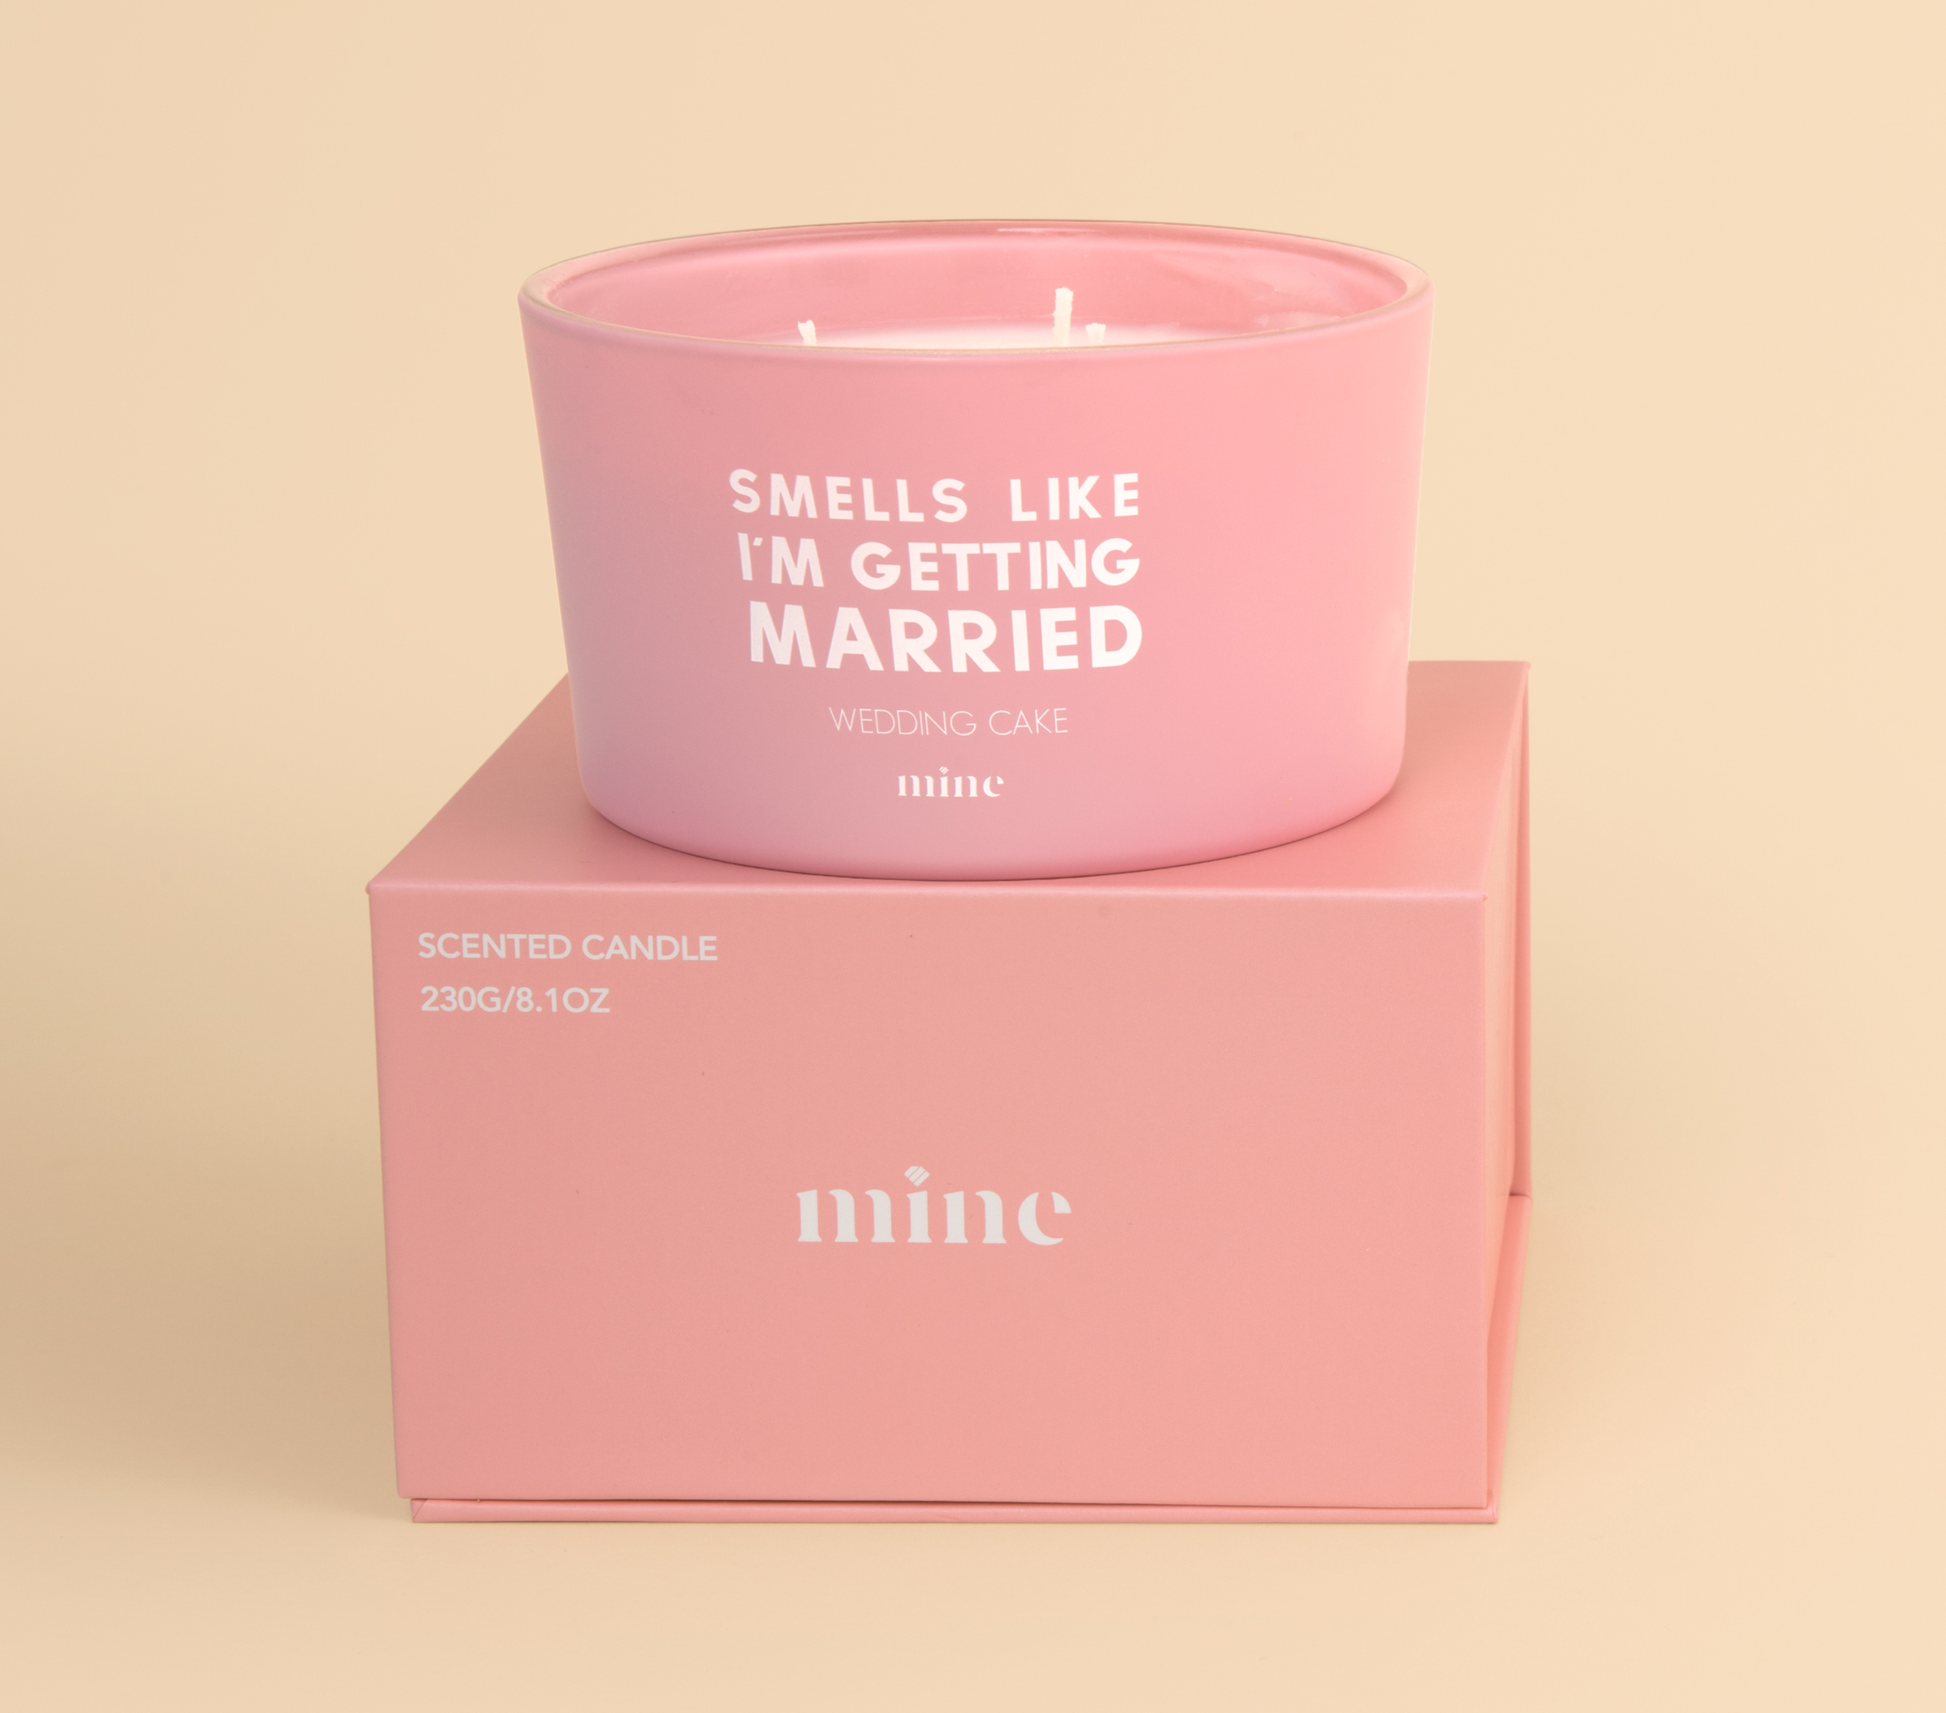 Wedding Cake Candle - The Mine Company - Smells Like I'm Getting Married - 8oz Pink Candle